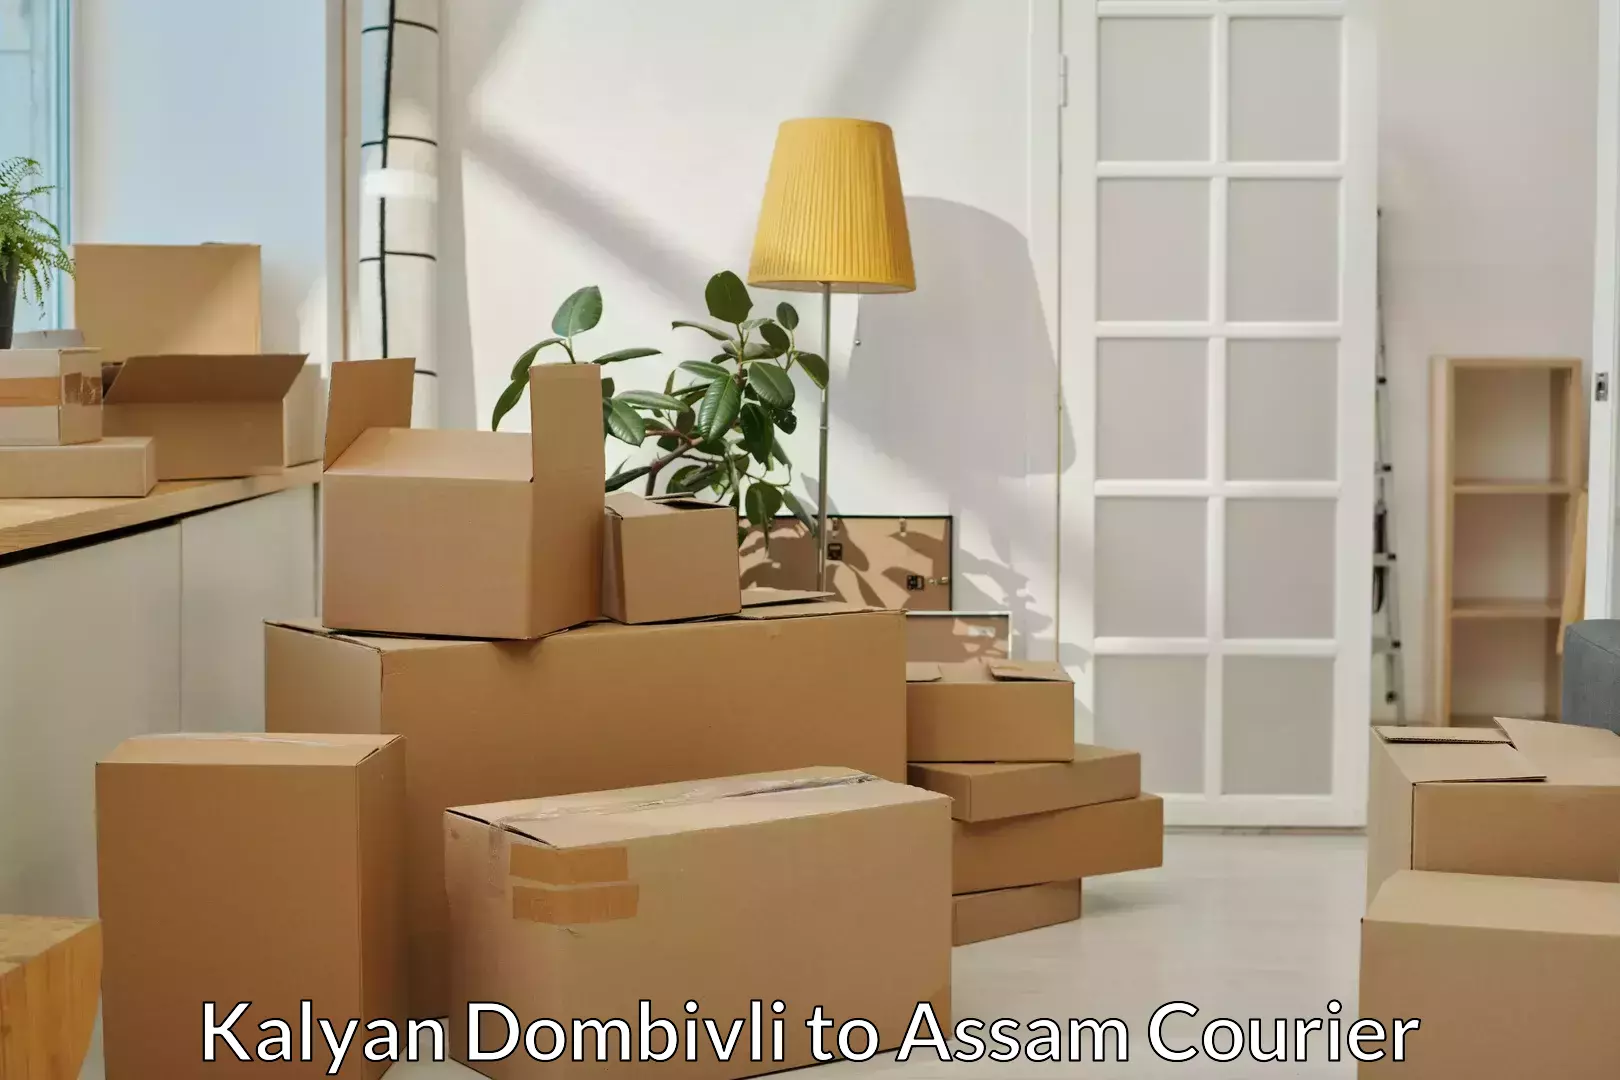 Trusted relocation experts Kalyan Dombivli to Lala Assam